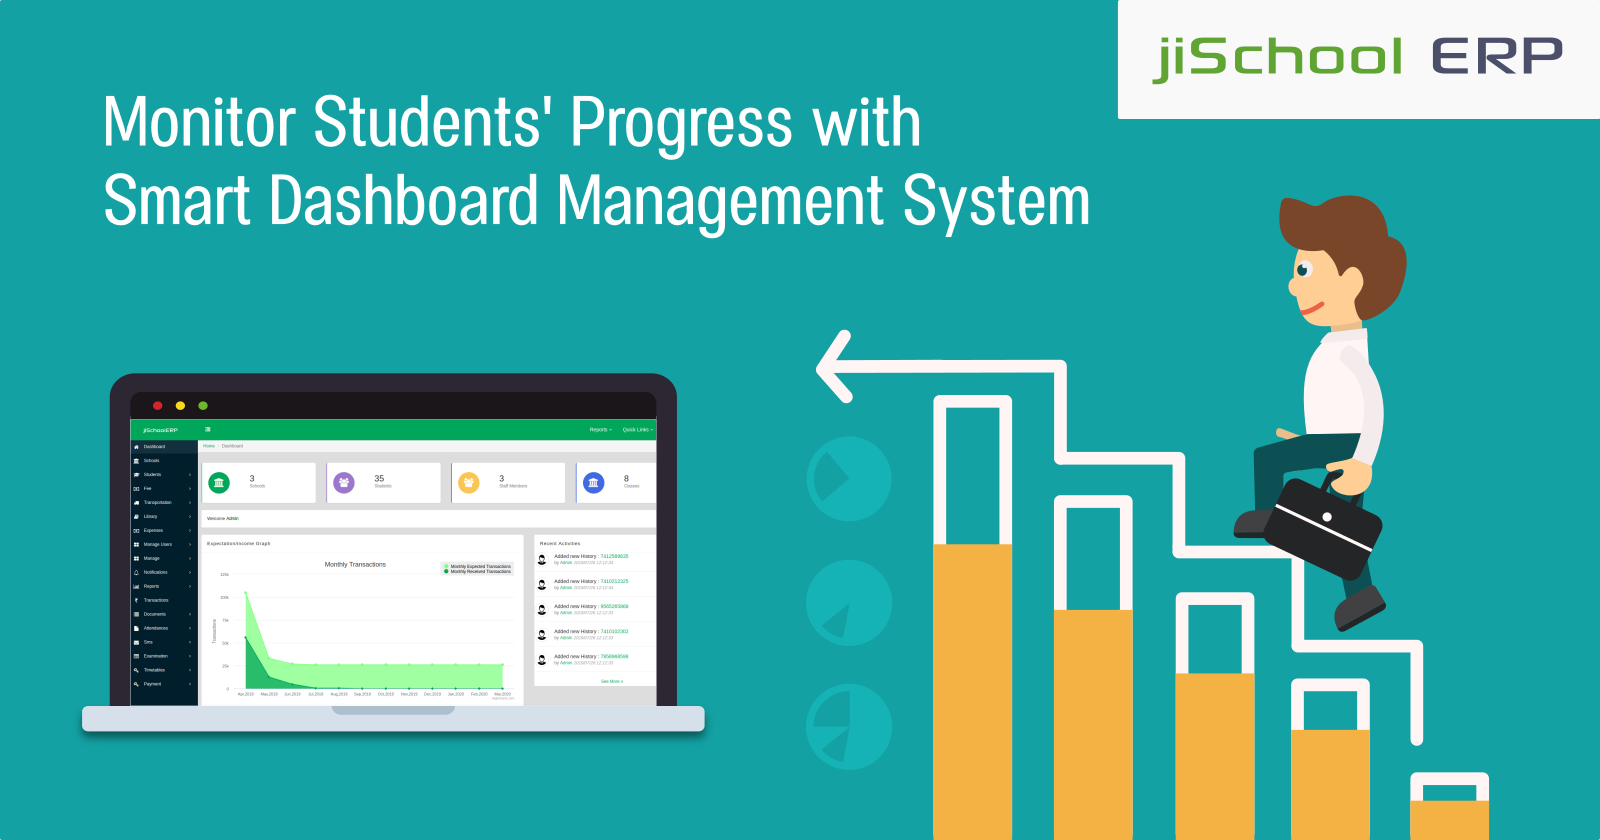 Monitor Students' Progress with Smart Dashboard Management System